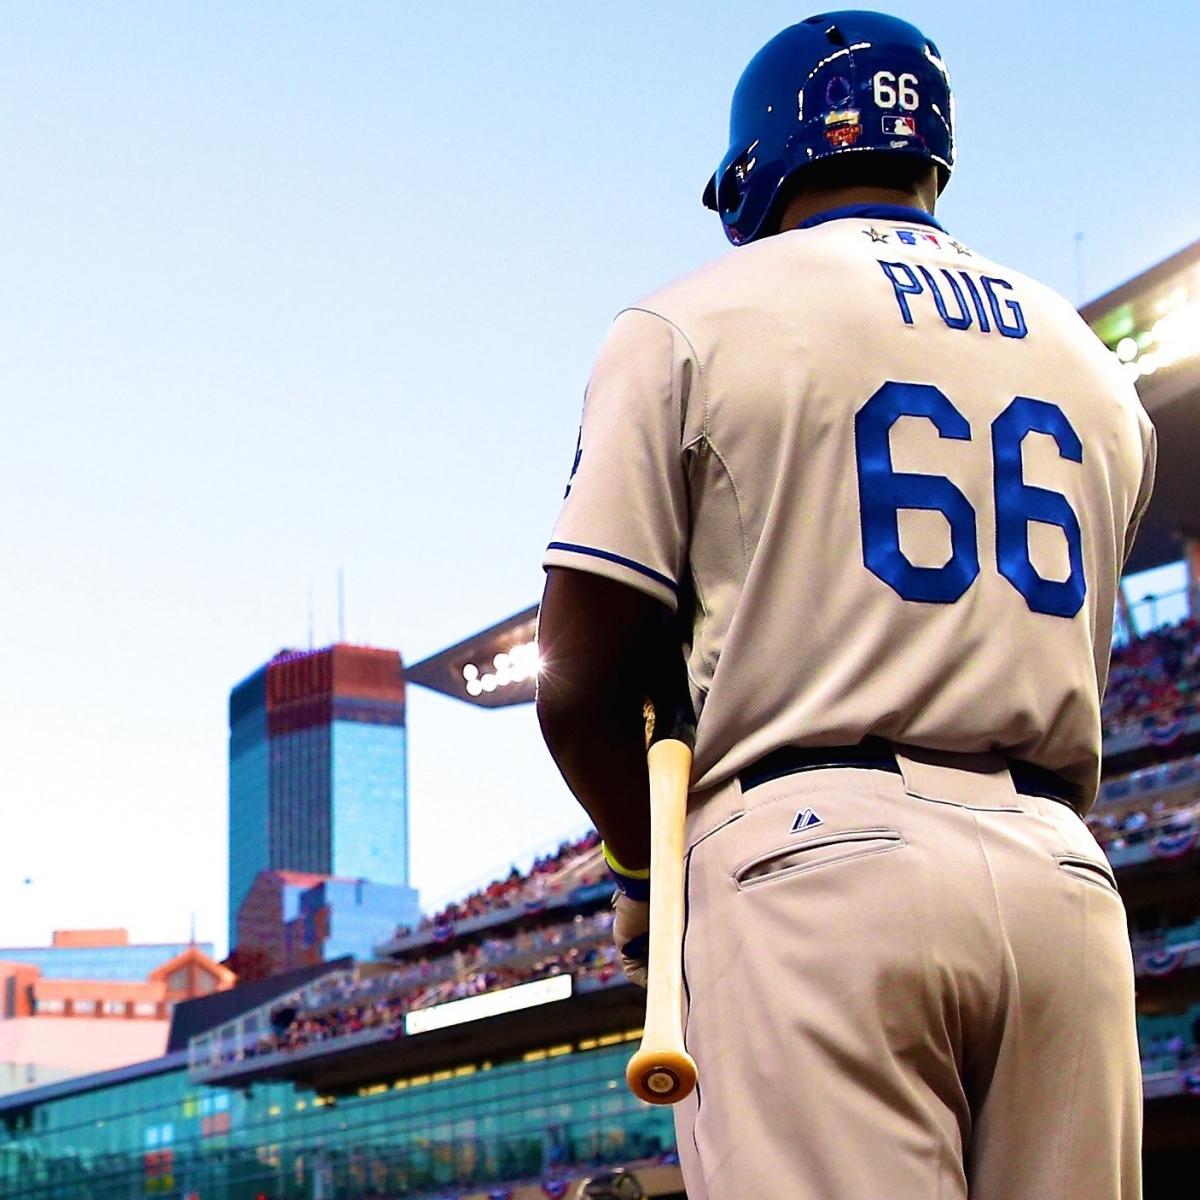 Yasiel Puig determined to overcome 'my worst season, in all aspects